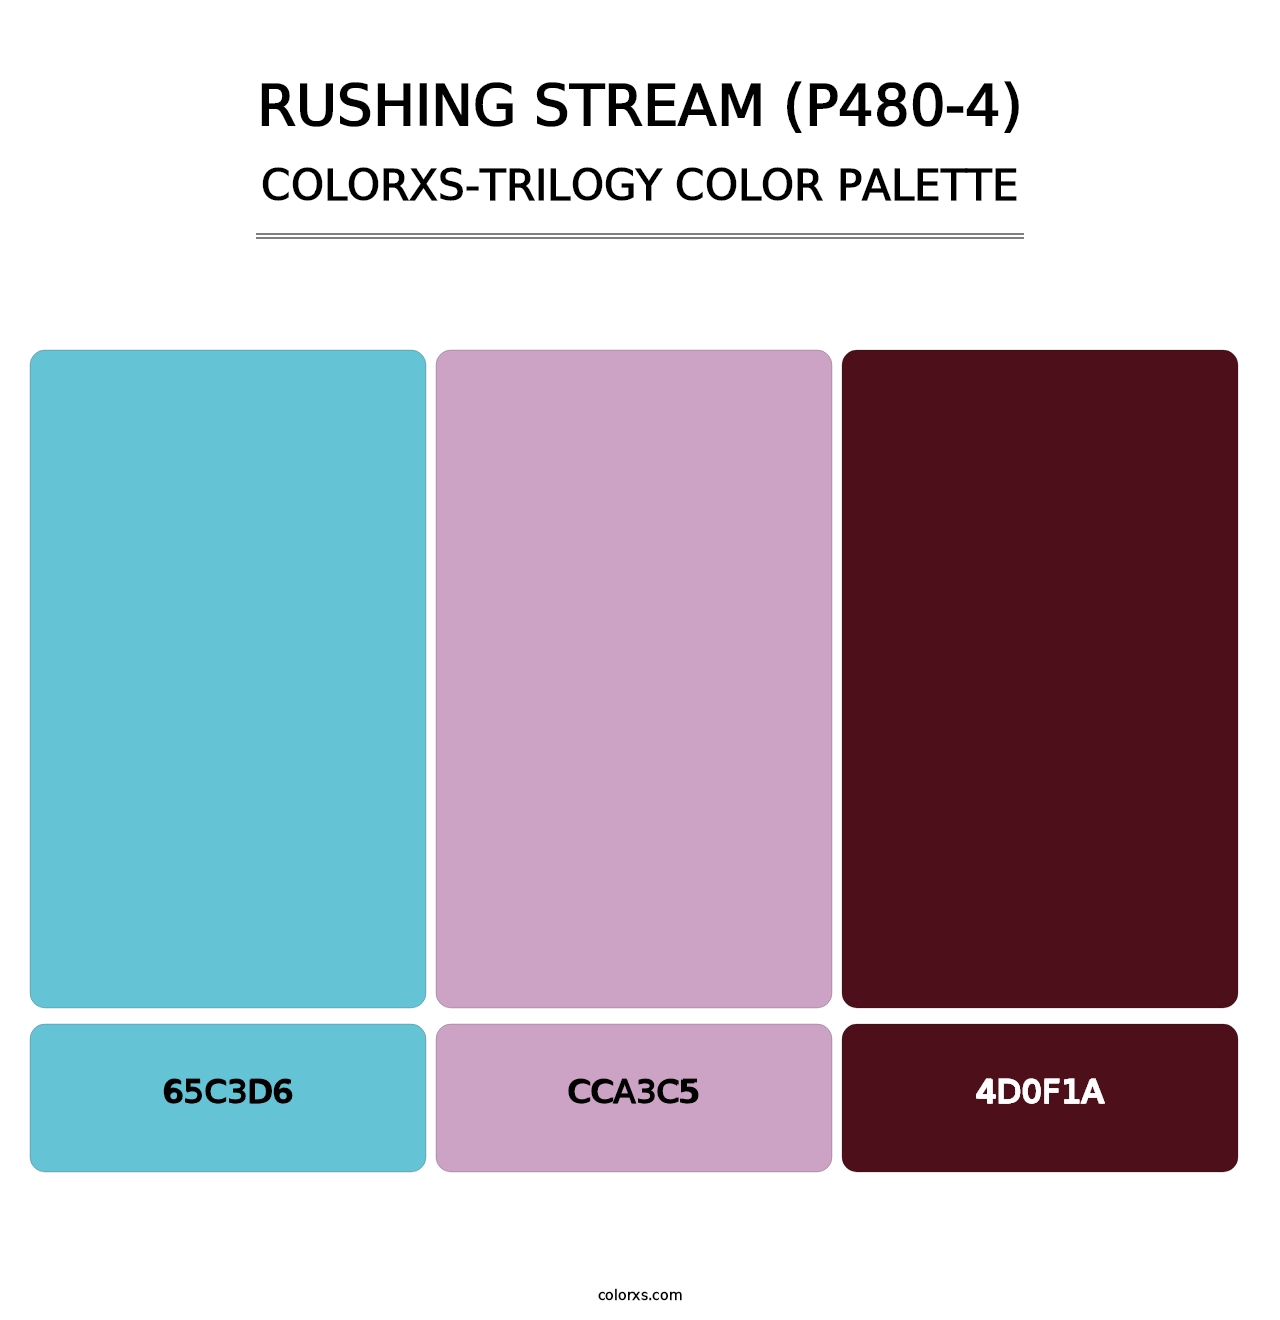 Rushing Stream (P480-4) - Colorxs Trilogy Palette